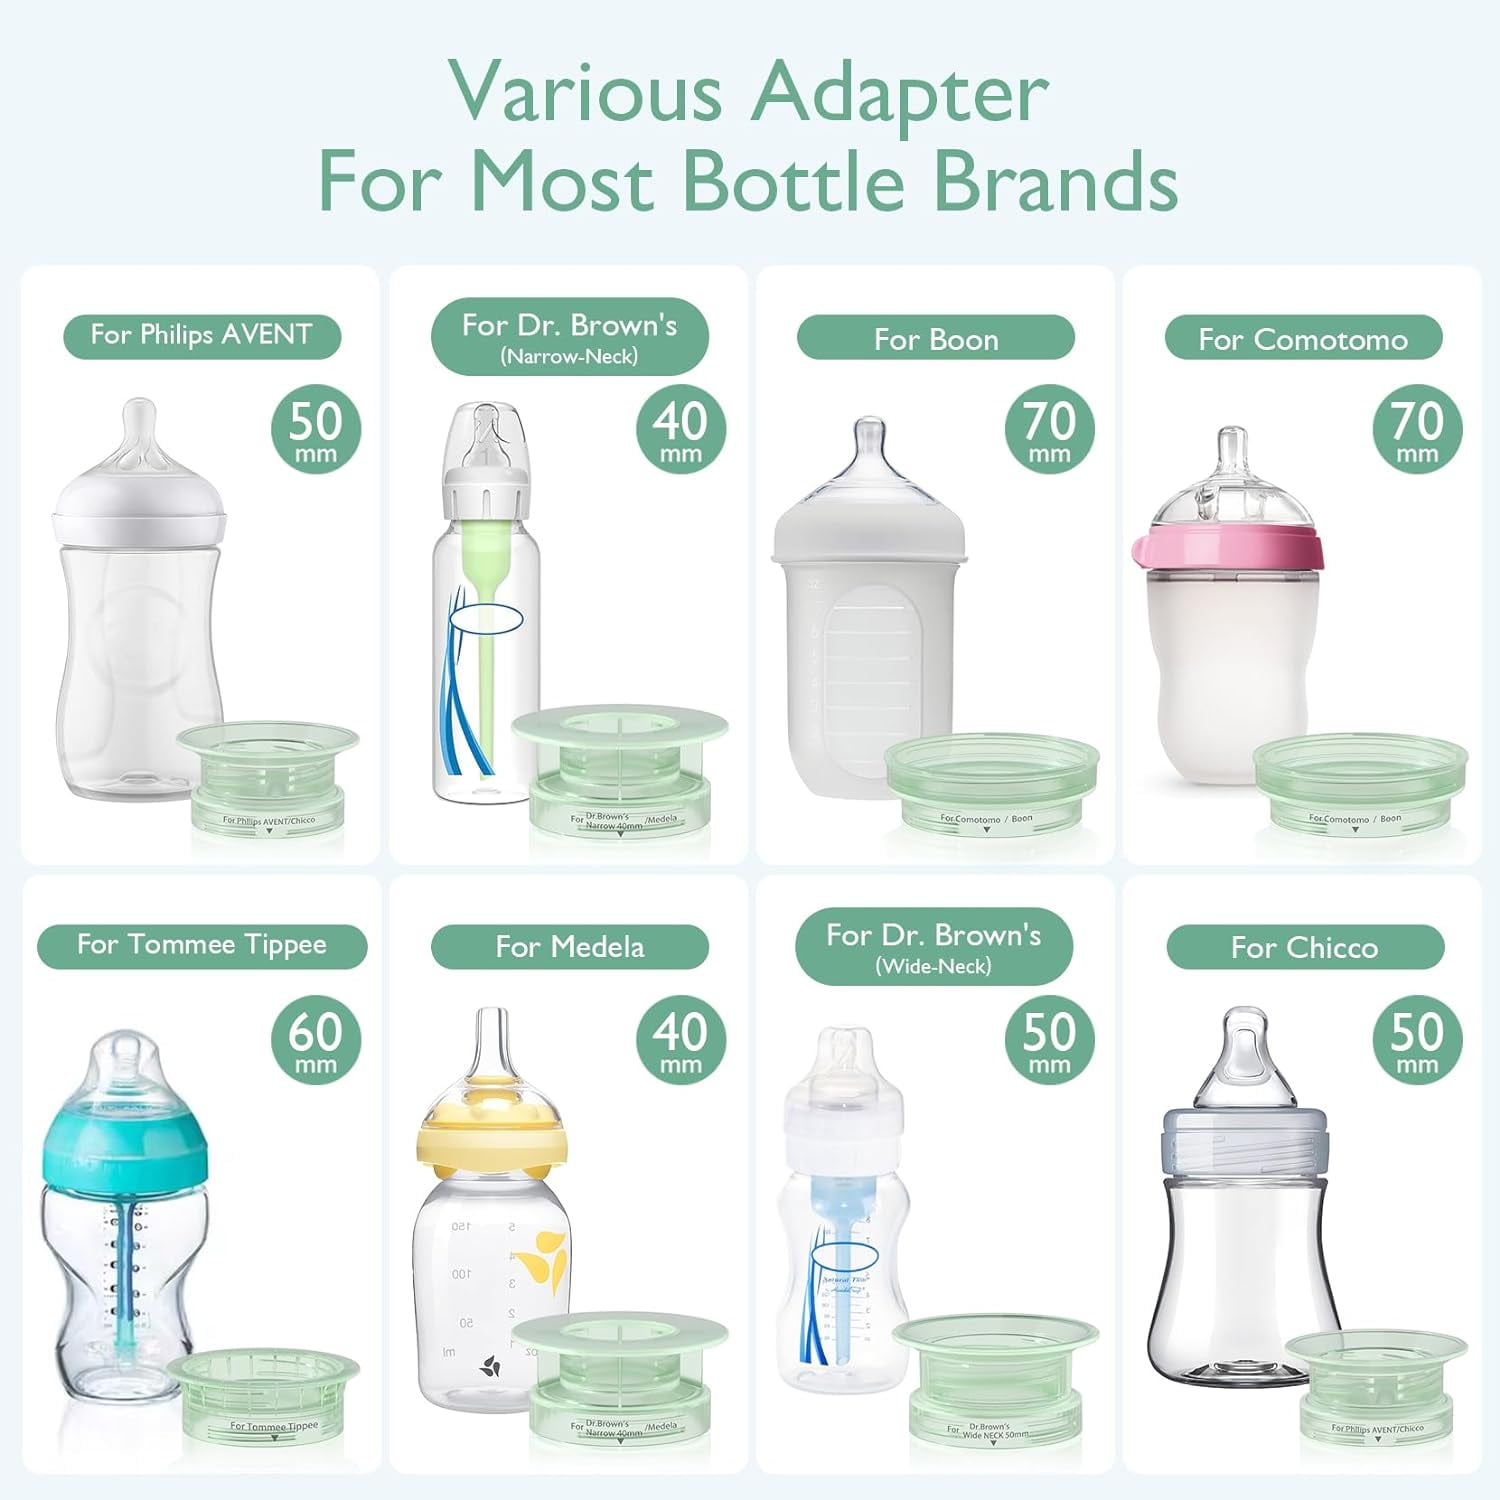 How to Use Momcozy Baby Bottle Warmer? Just 5 Steps! 